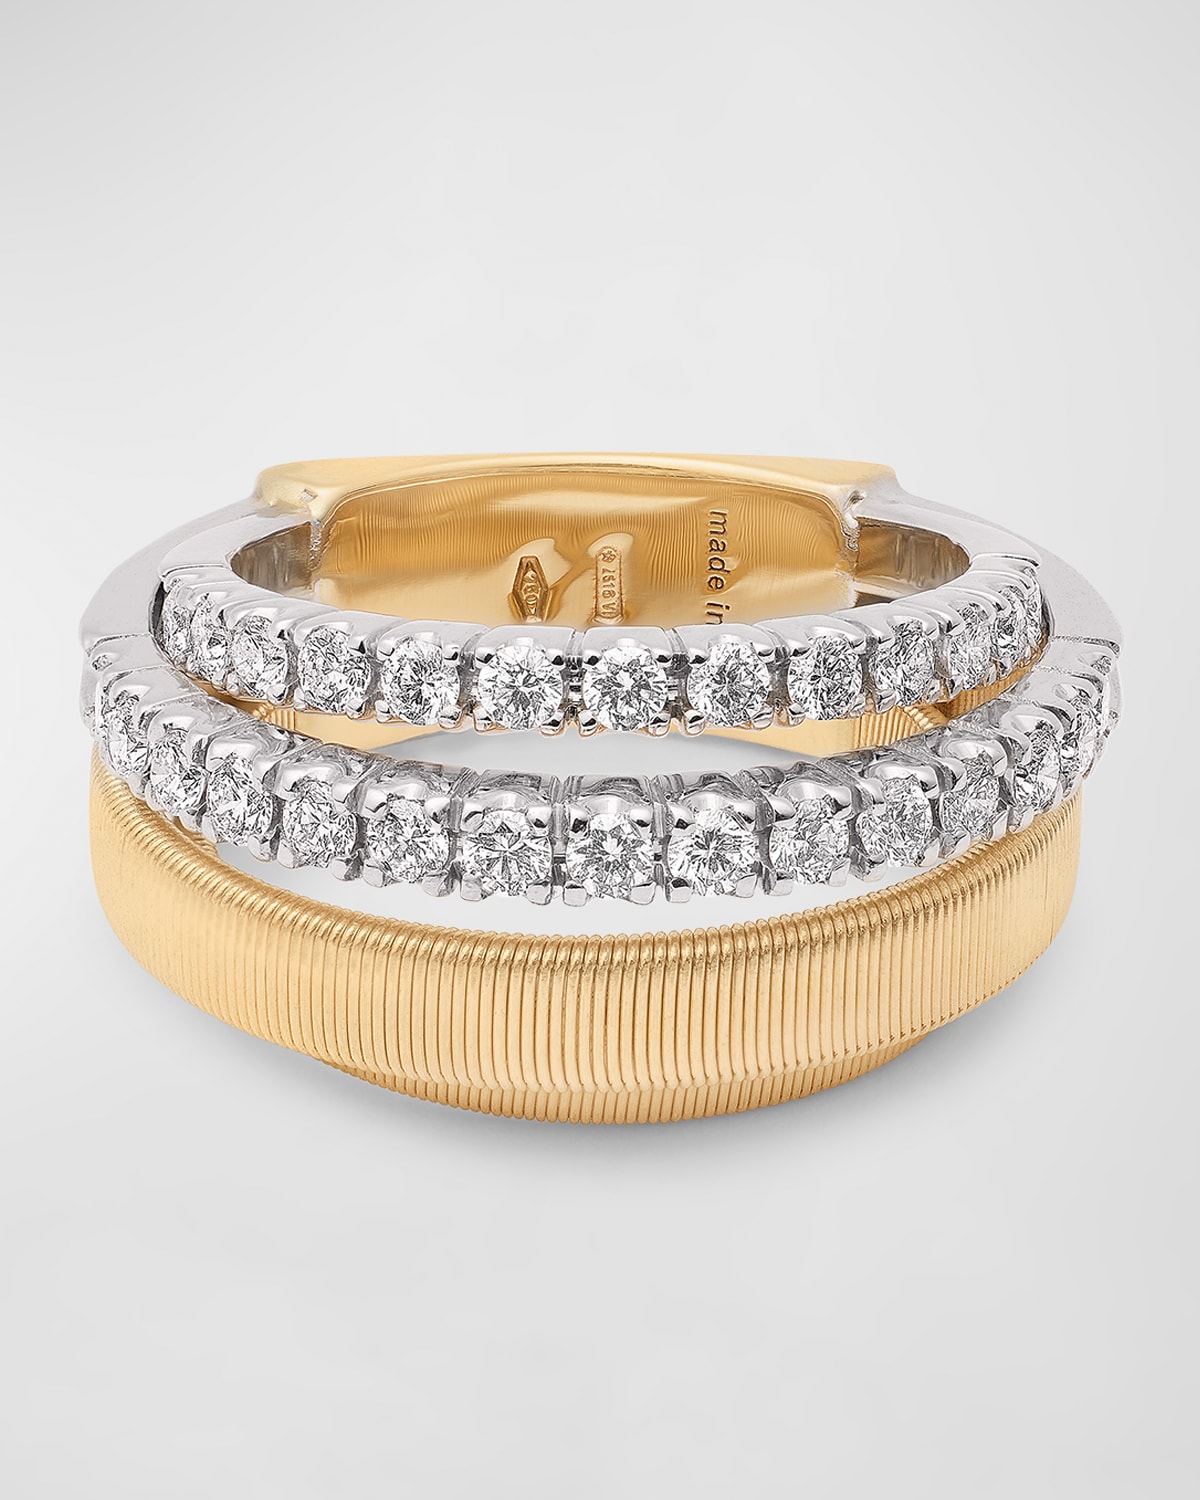 18K Yellow Gold Masai Ring with Two Strands of Diamonds, Size 6